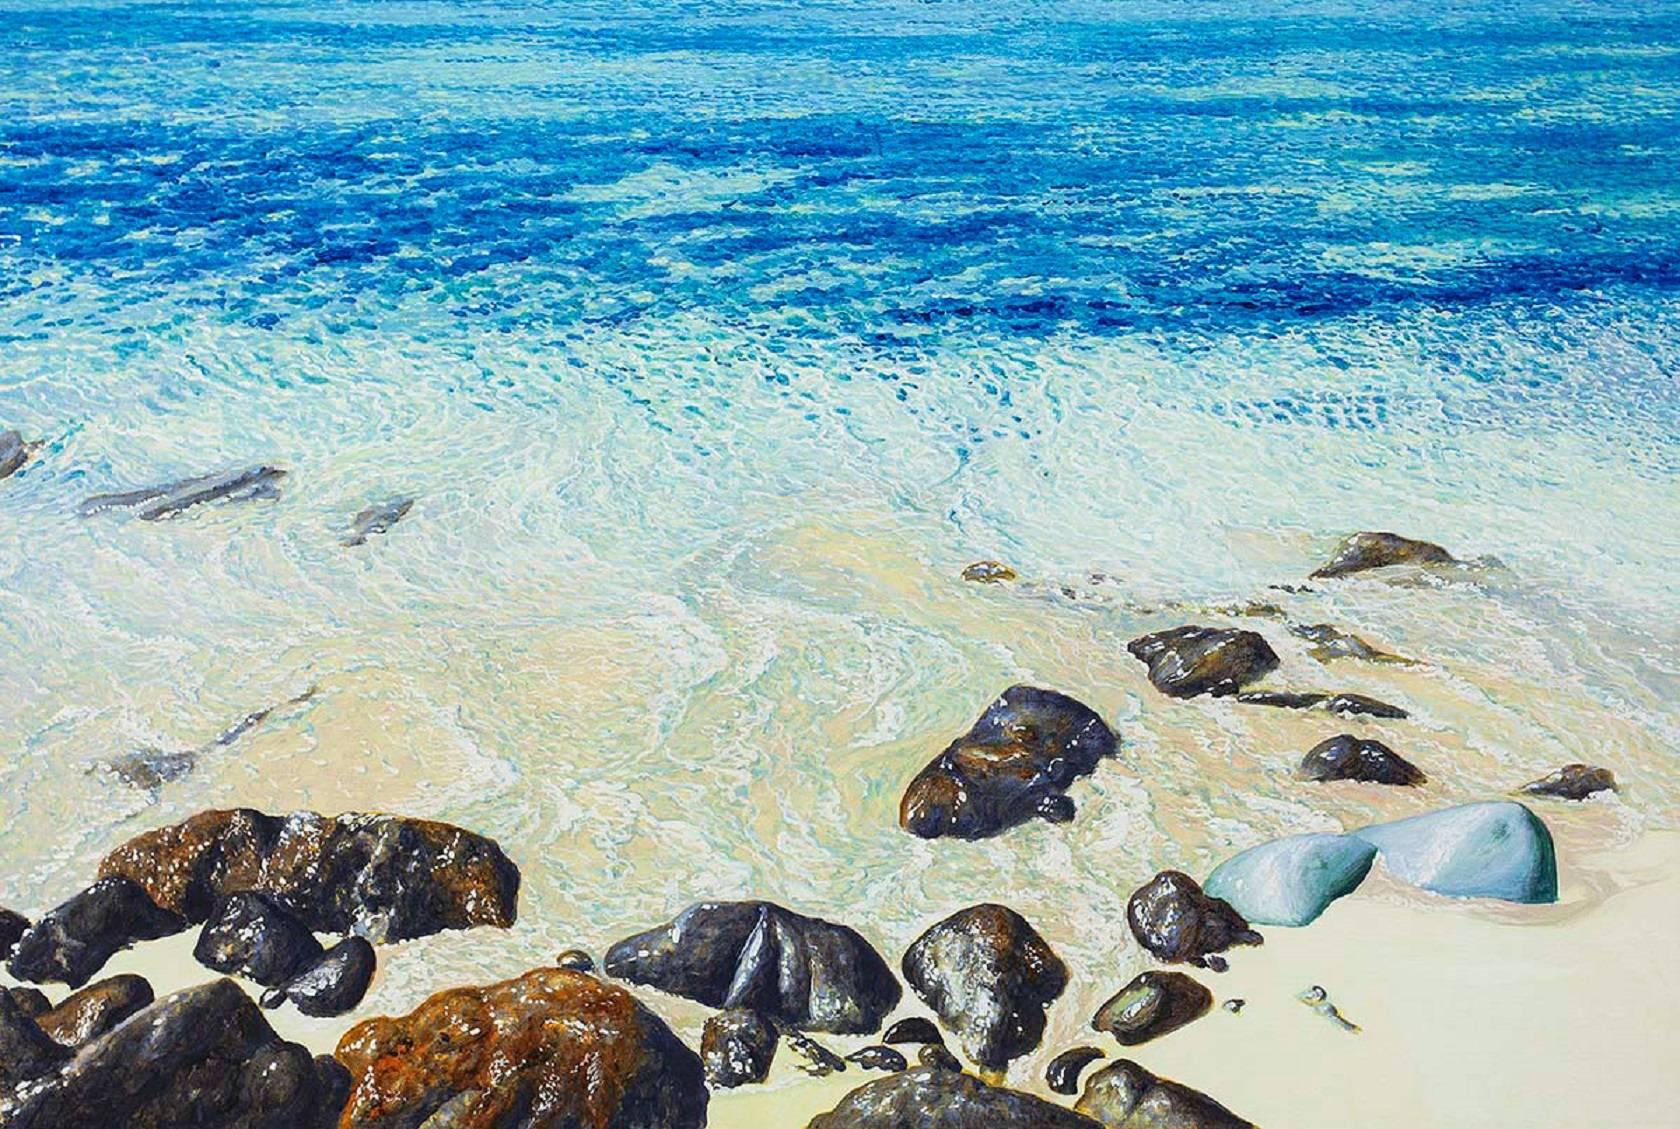 ST BARTH Vivid Realistic Beach Scene with Rocks and Waves - Painting by Fabio Aguzzi